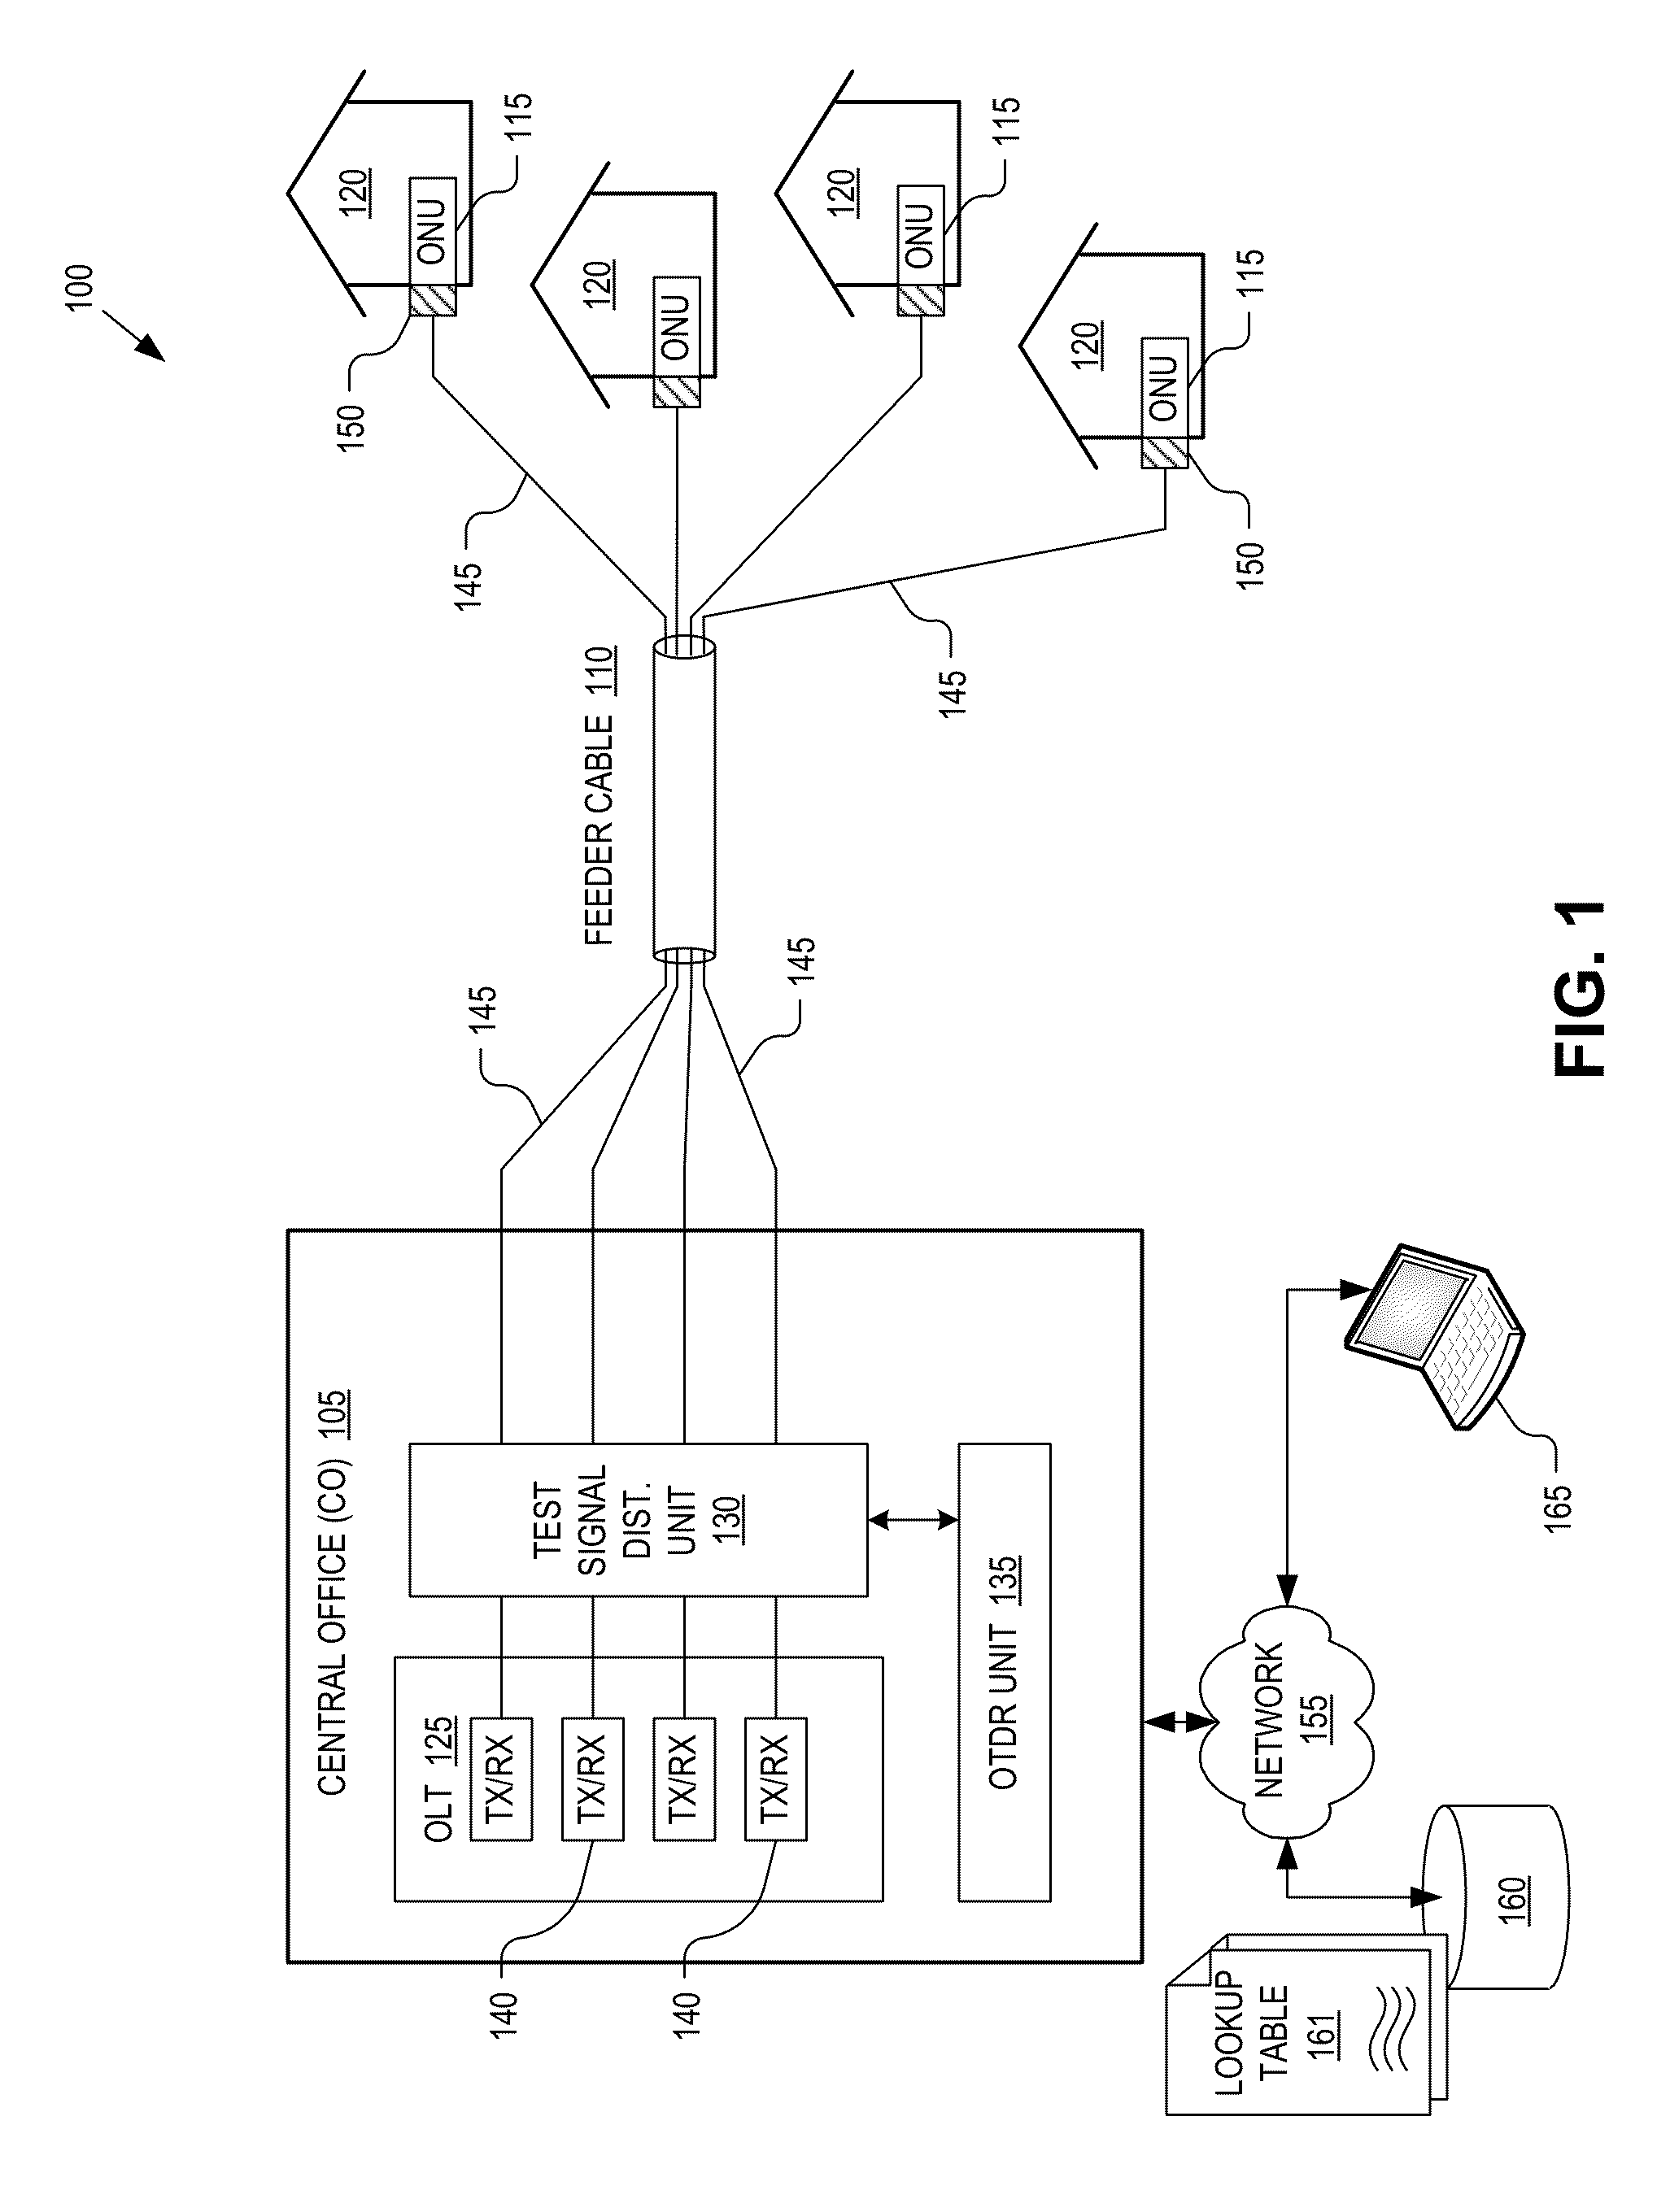 Fiber diagnosis system for point-to-point optical access networks